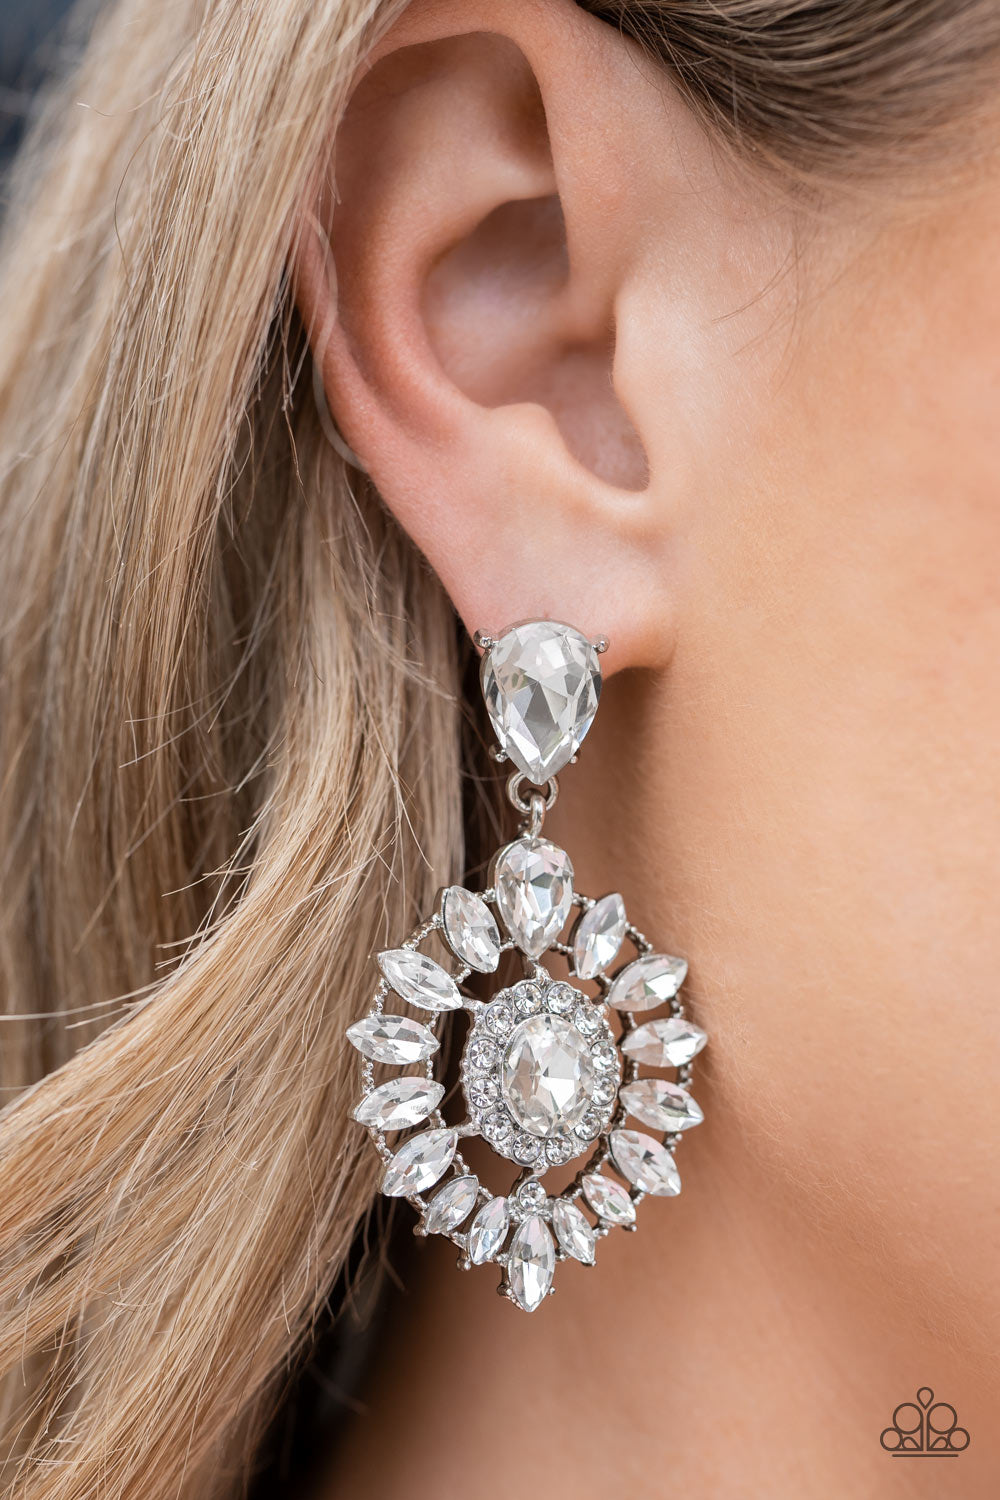 Paparazzi My Good LUXE Charm - White Earrings